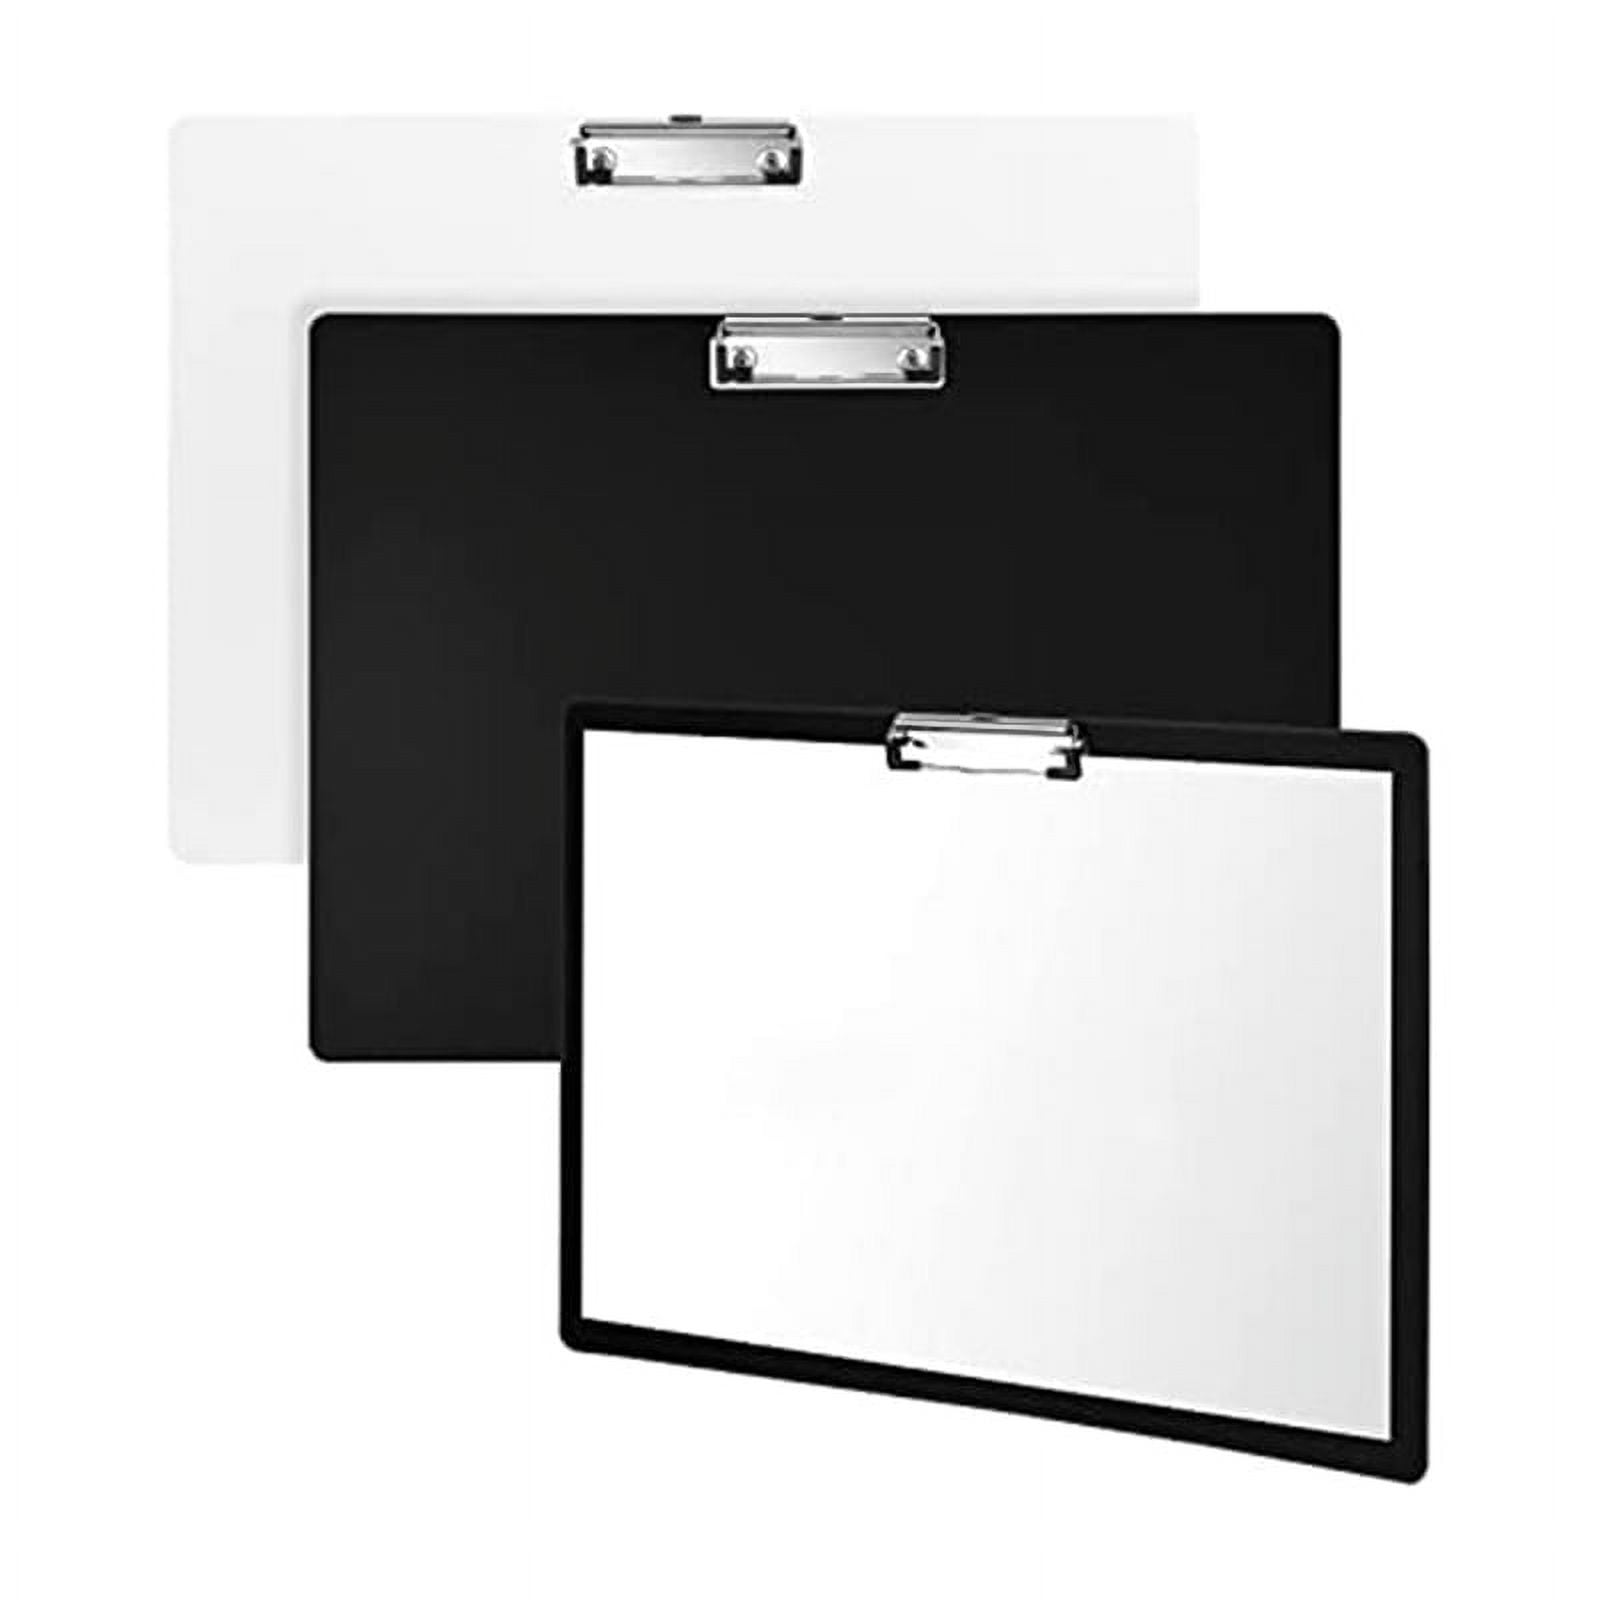 Amazon.com : 11x17 Inch Ledger Hardboard/Clipboard with 3 Lever Operated  Clips and a Mini-Calculator, Either Landscape or Portrait Media Format,  ECO-Friendly and Great Drafting Drawing Board Brown (1 Pack) : Office  Products